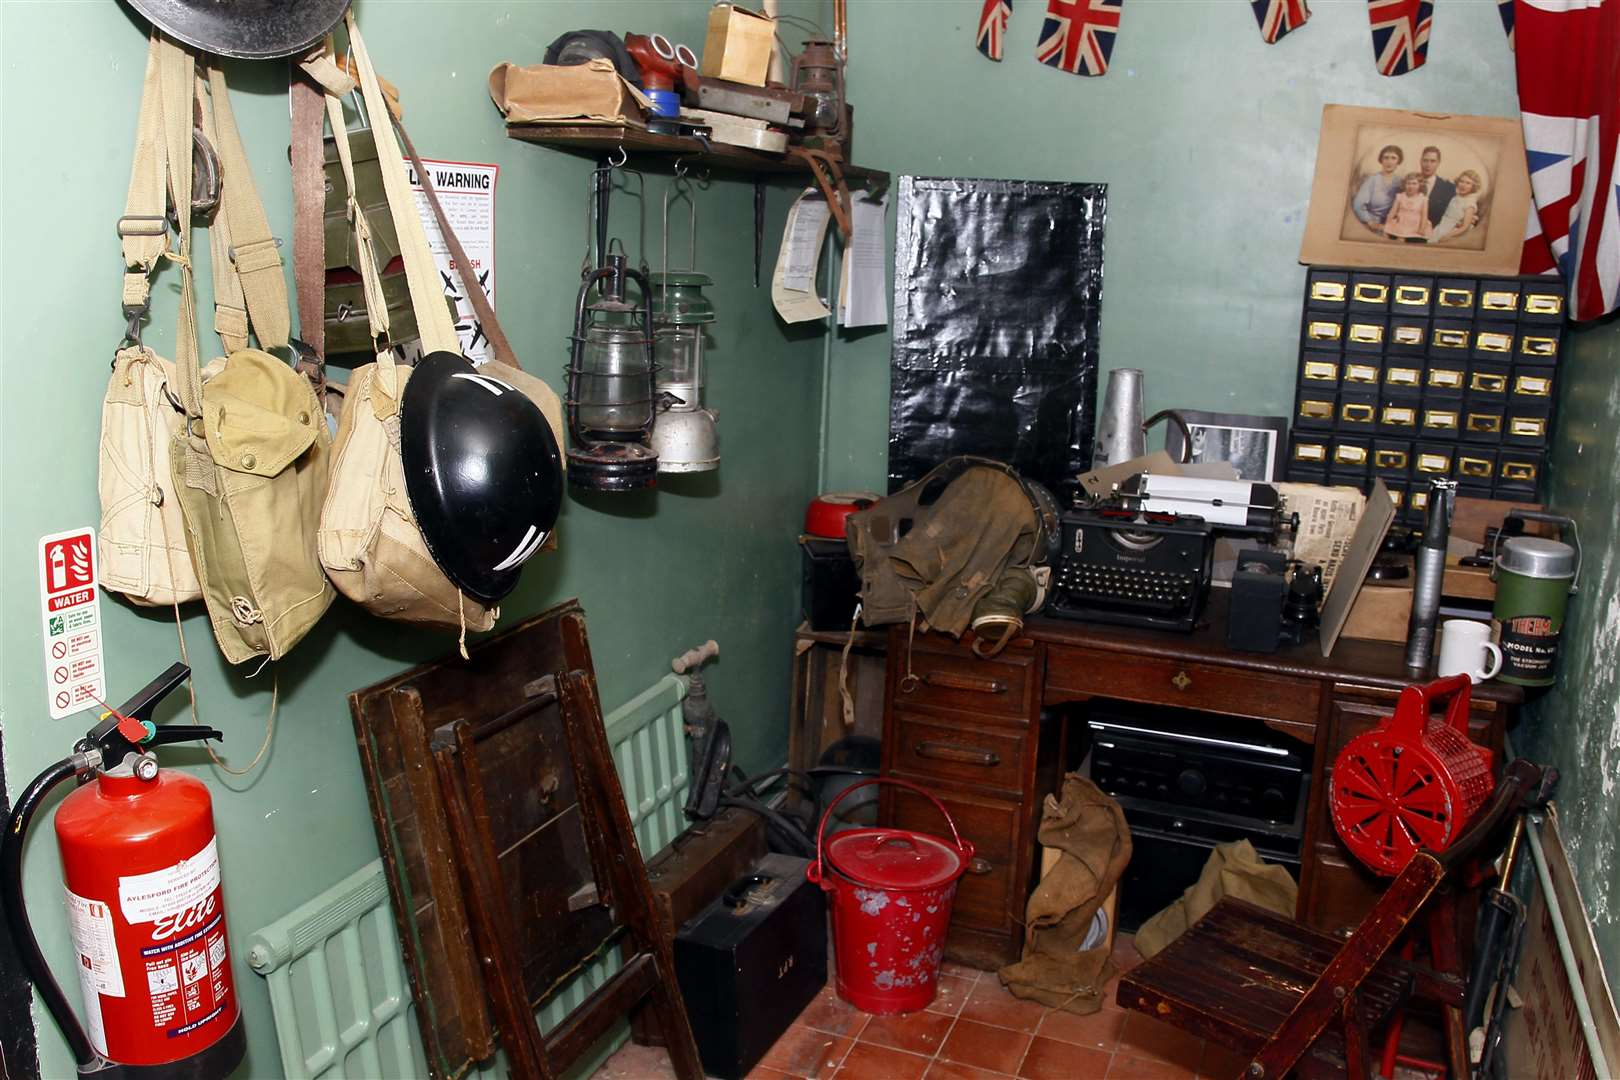 Visit the Old Forge Wartime House for an authentic Home Front experience